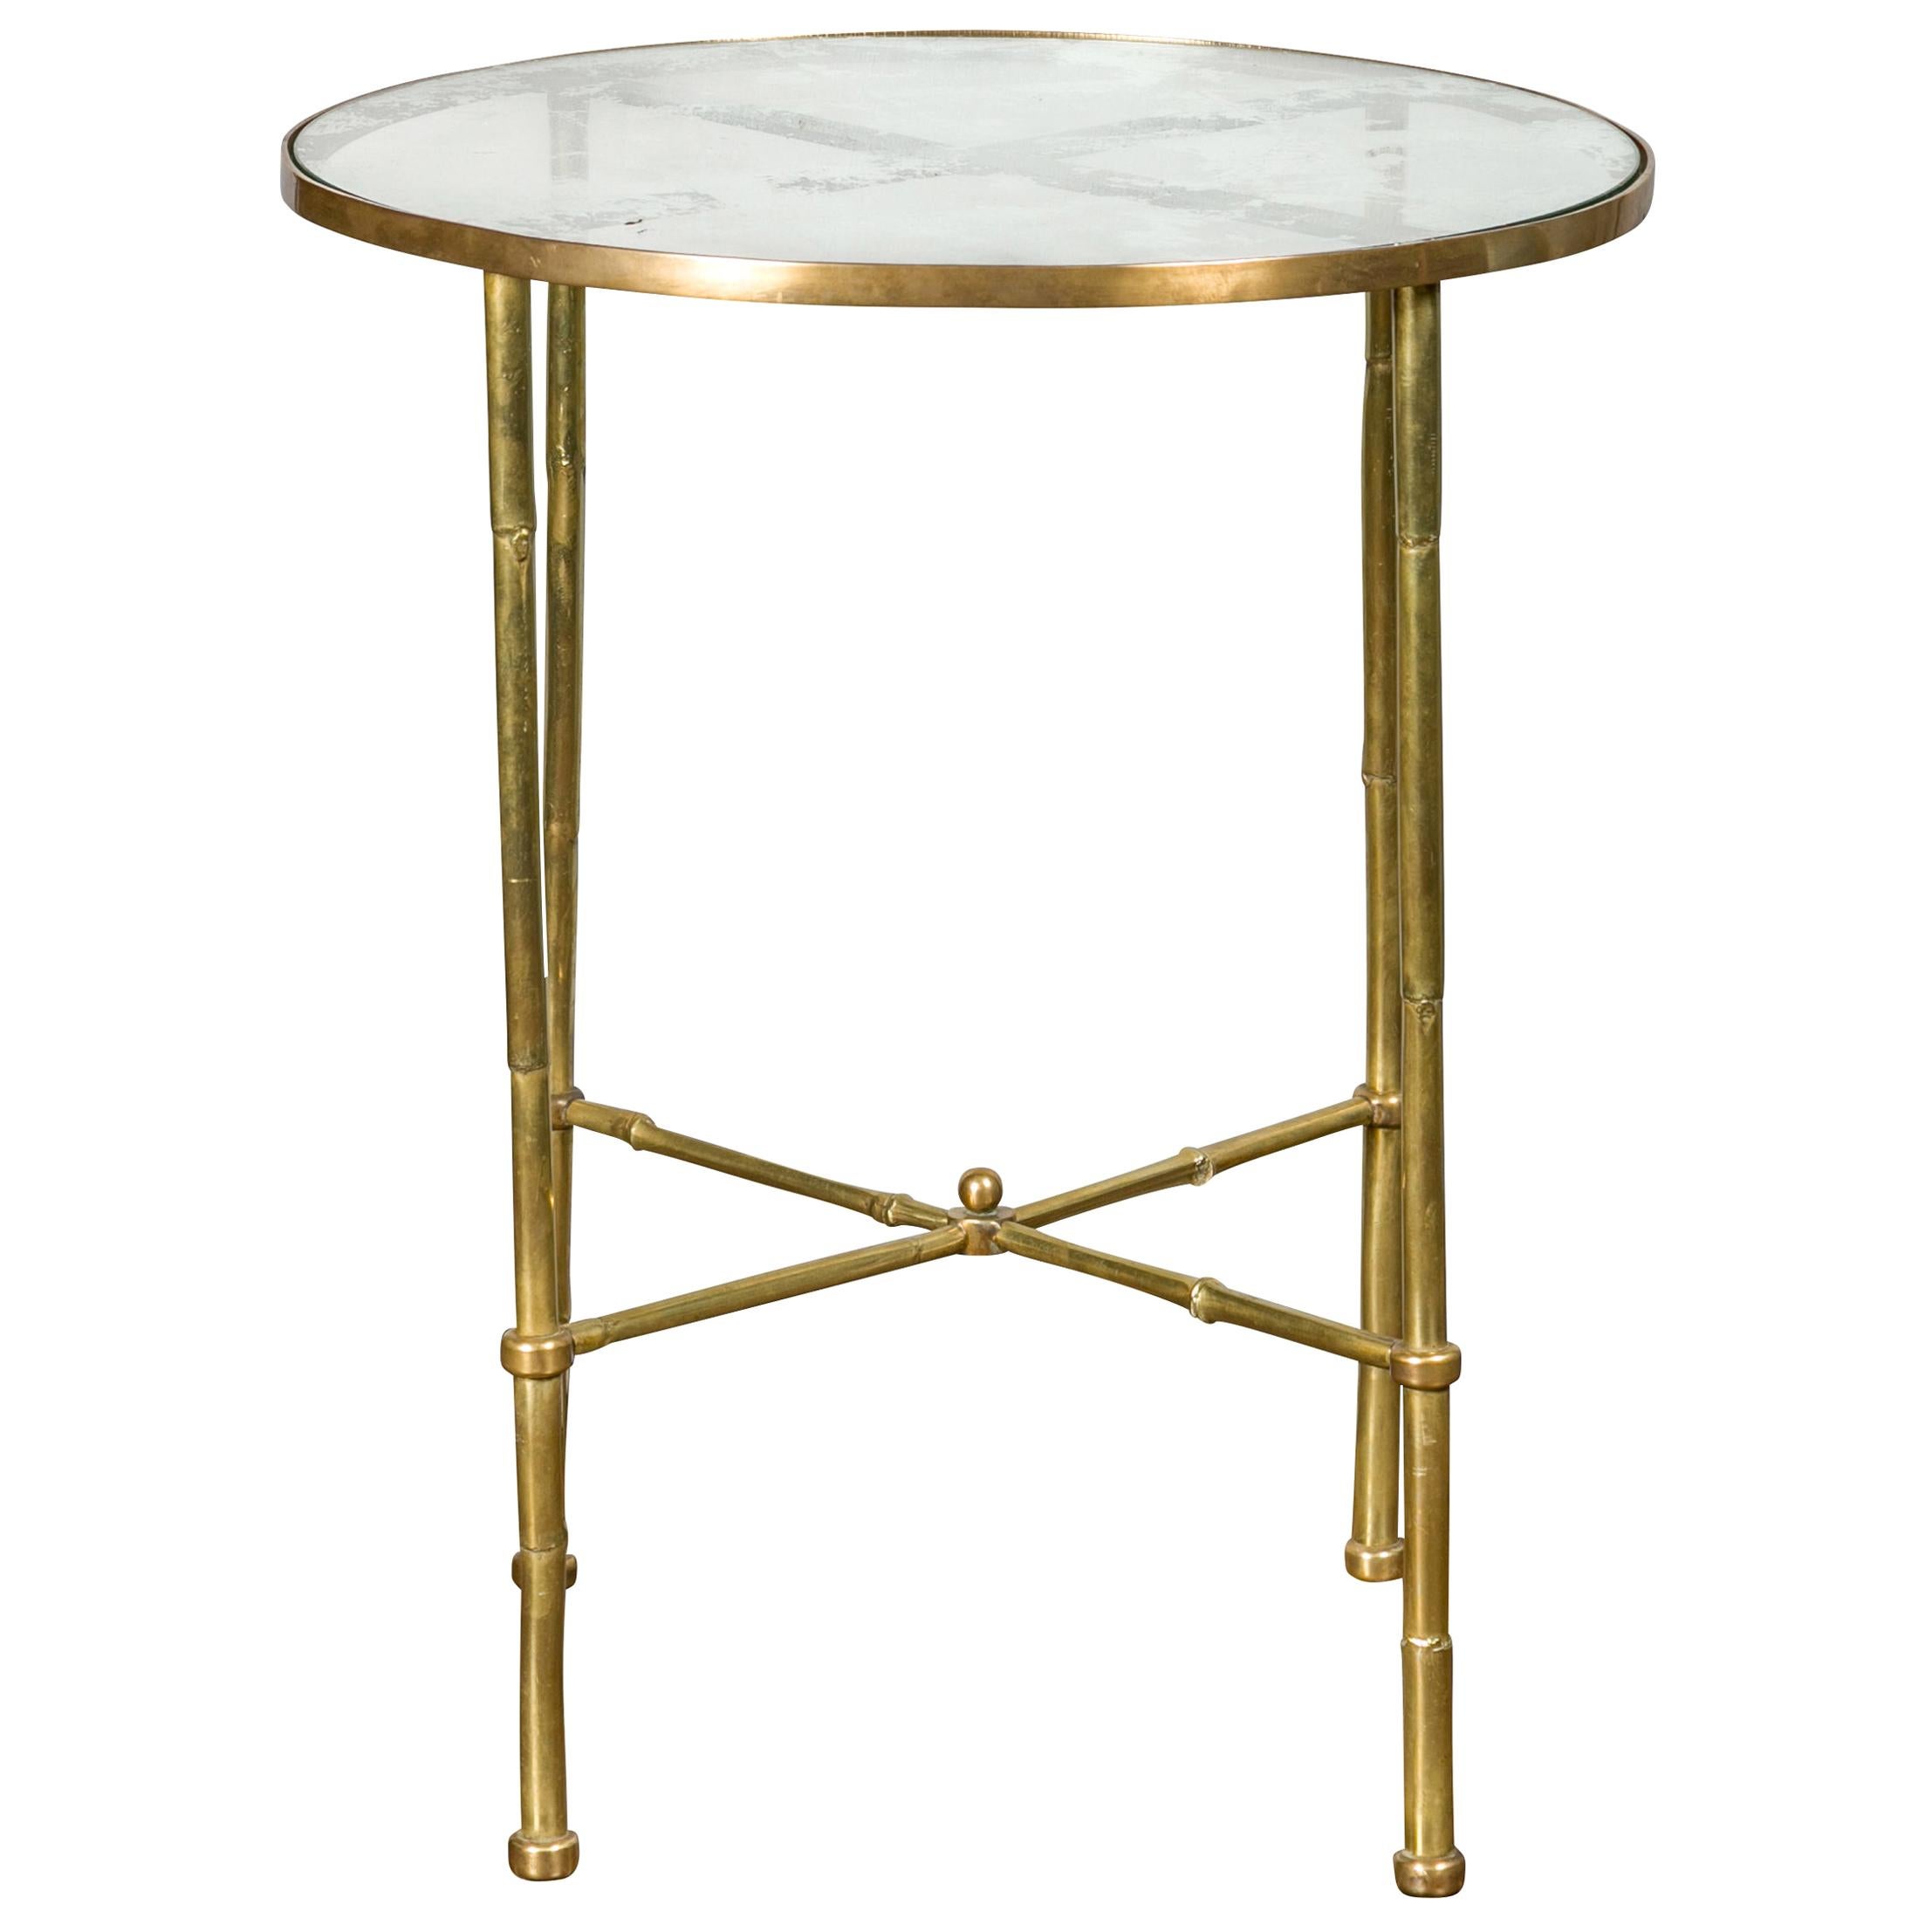 Italian Midcentury Brass Bamboo-Inspired Side Table with Distressed Glass Top For Sale